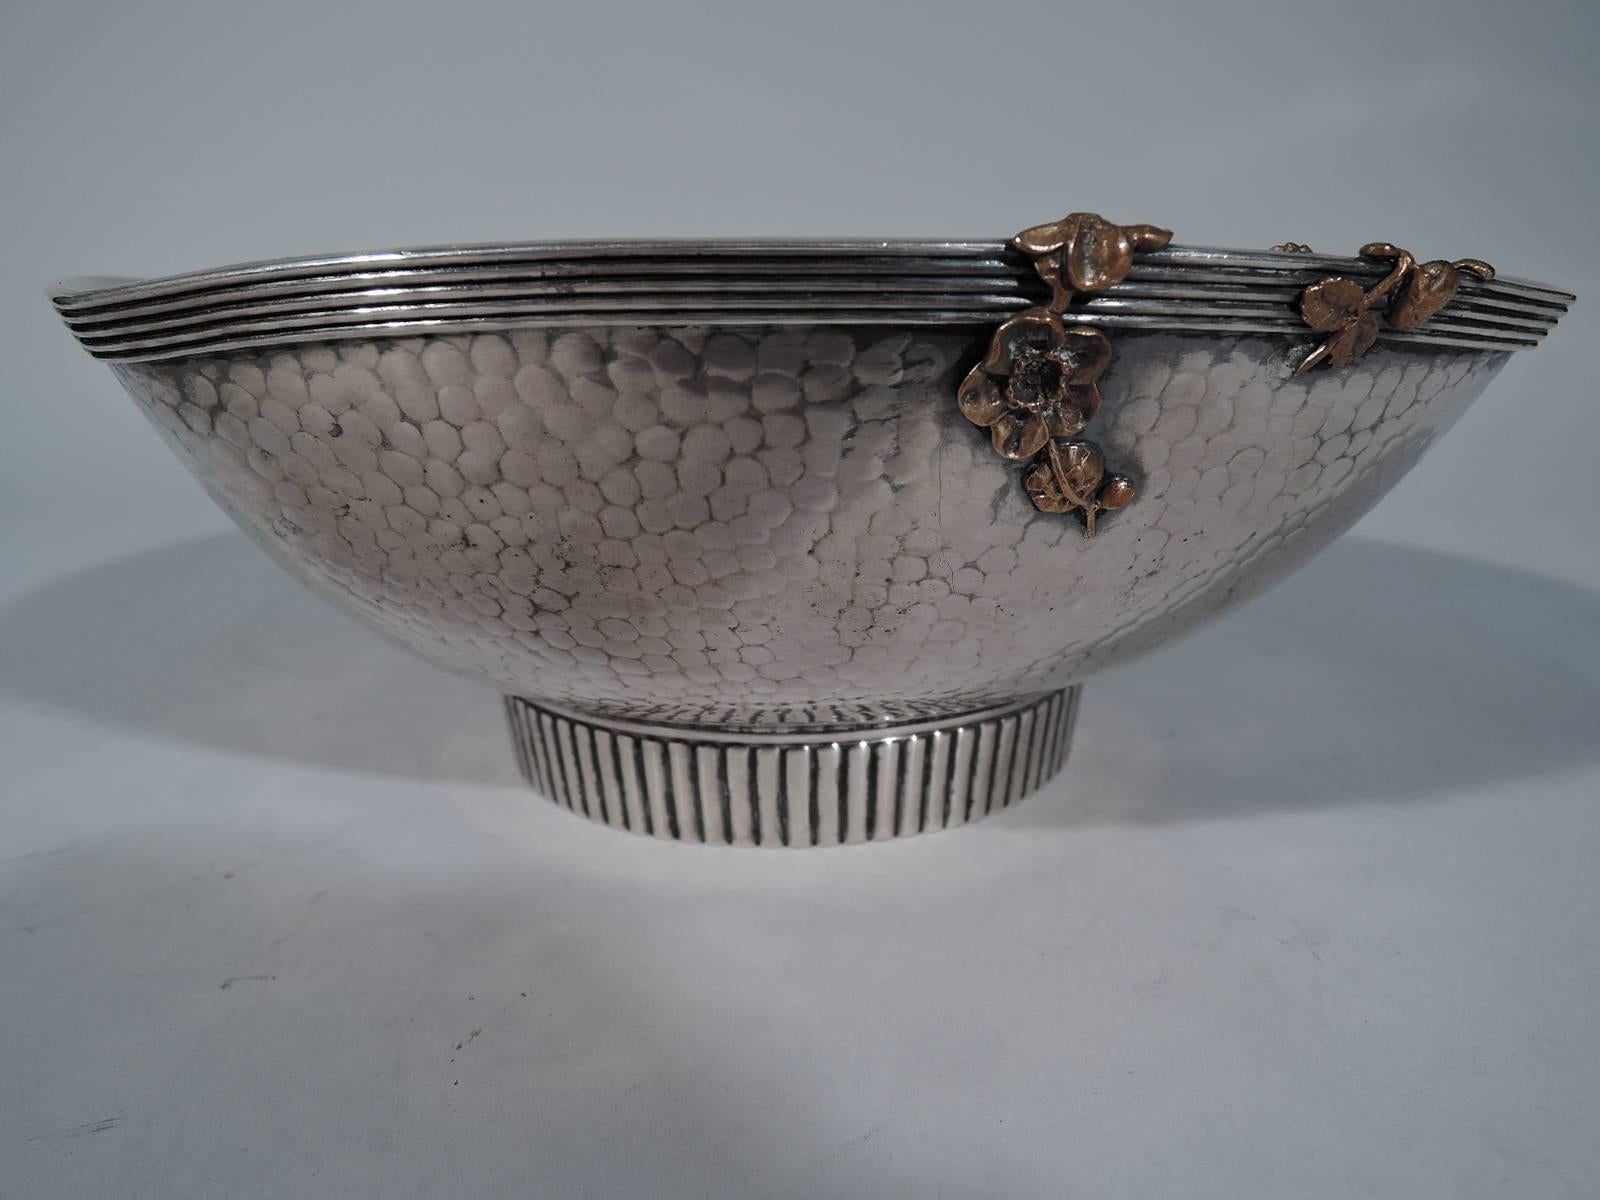 Rare and Beautiful Gorham Hand-Hammered Sterling Silver and Mixed Metal Bowl 1